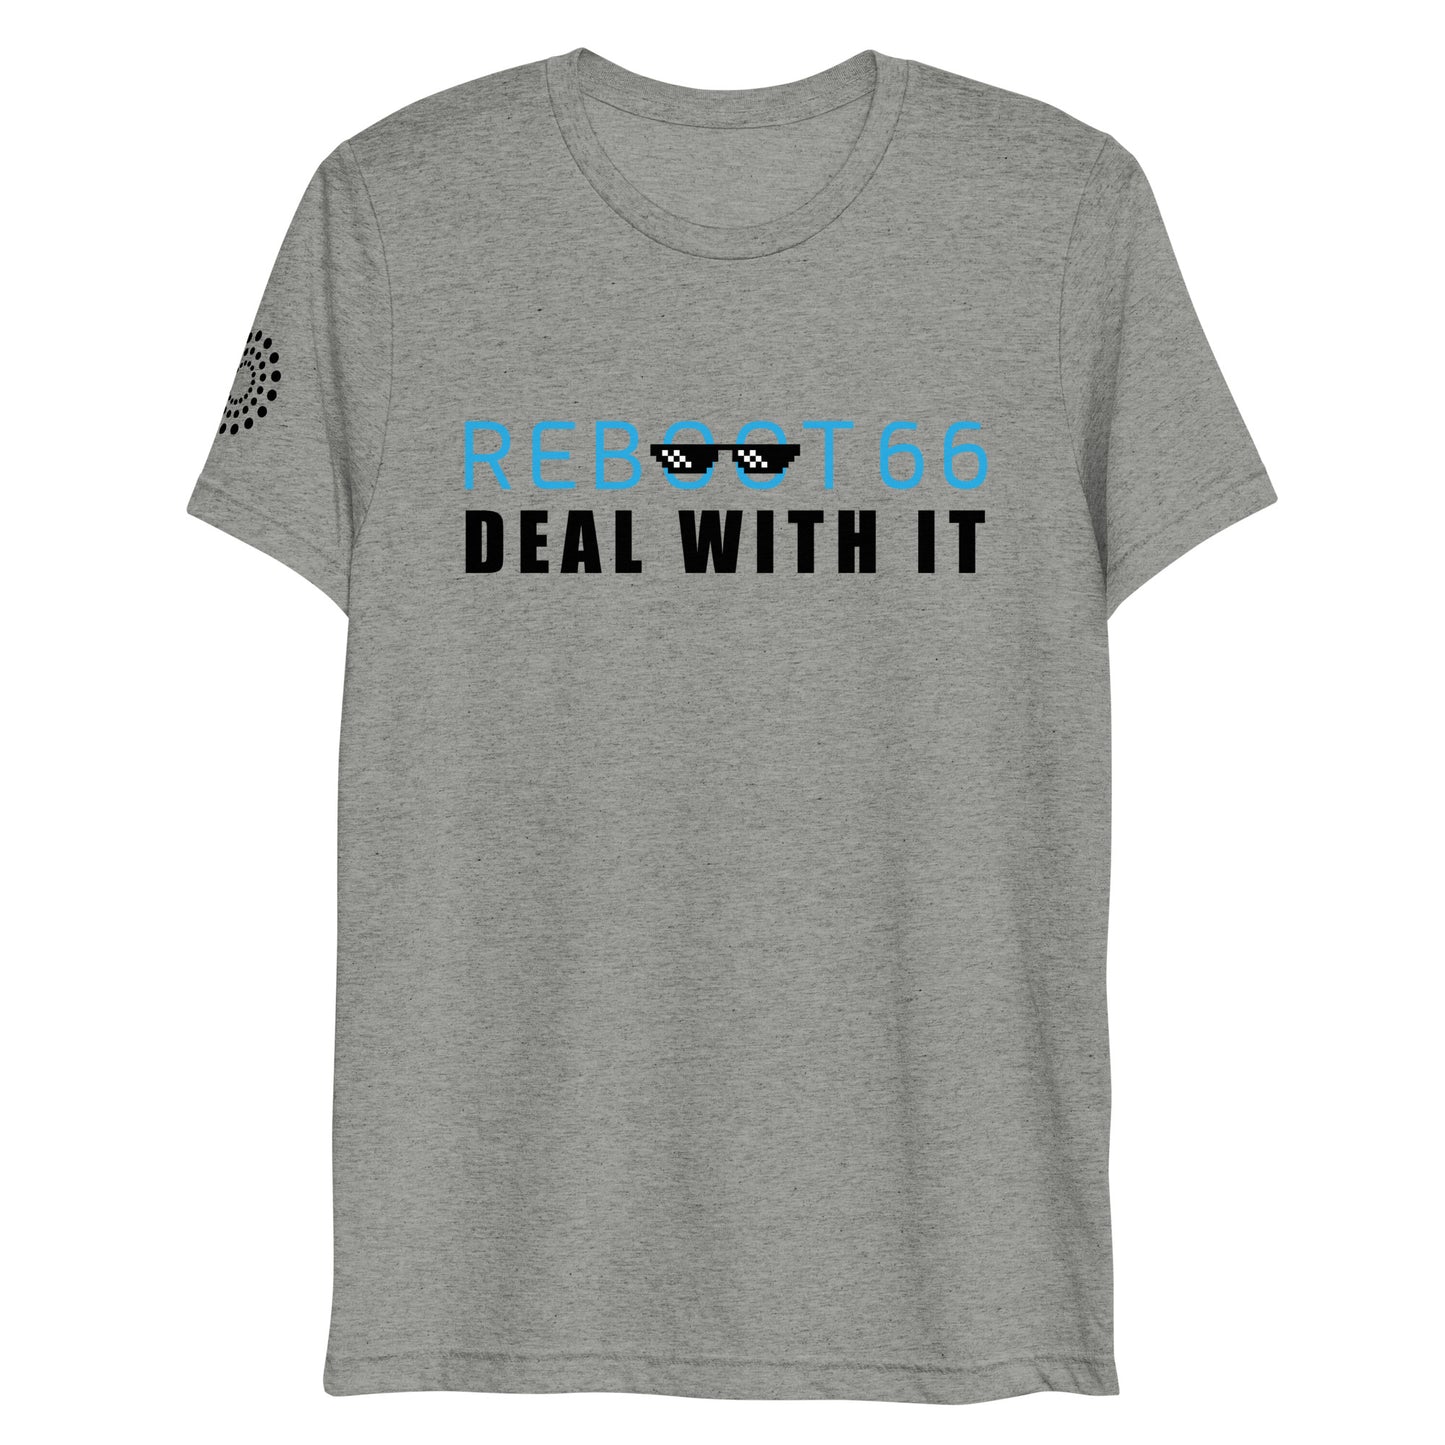 Reboot 66 - Deal with it Short sleeve t-shirt